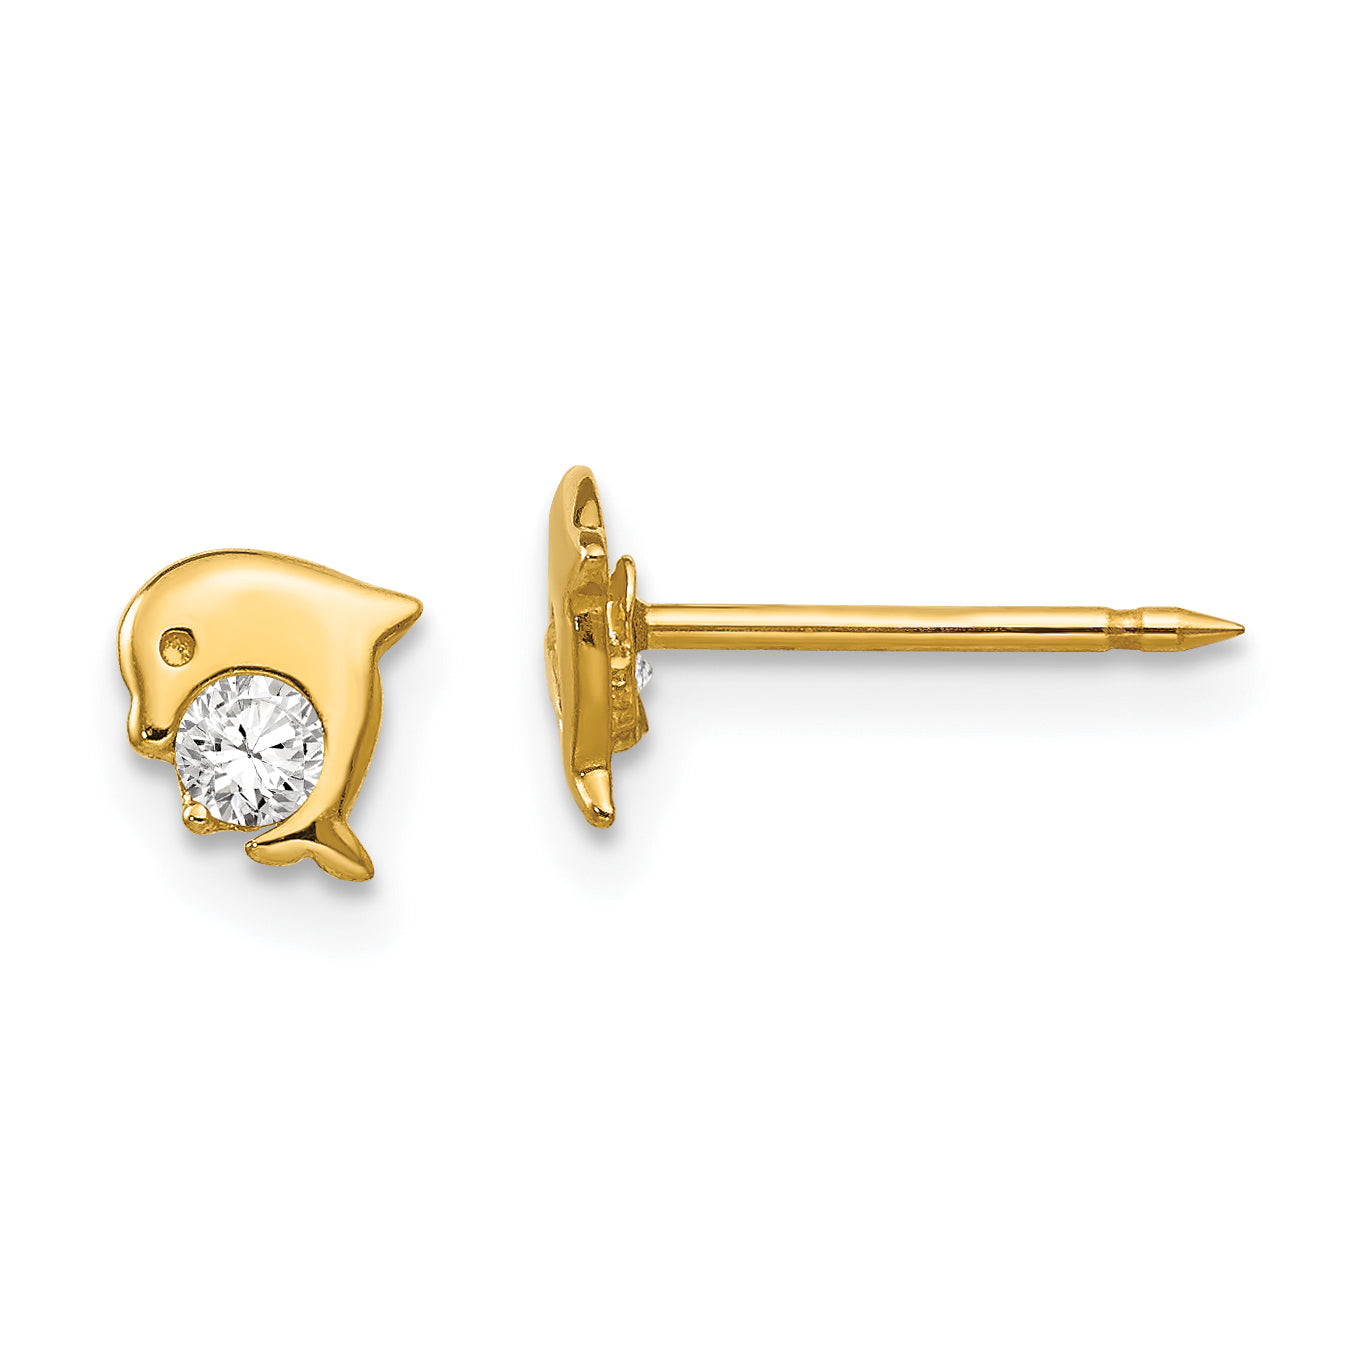 Inverness 14k Dolphin CZ Earrings